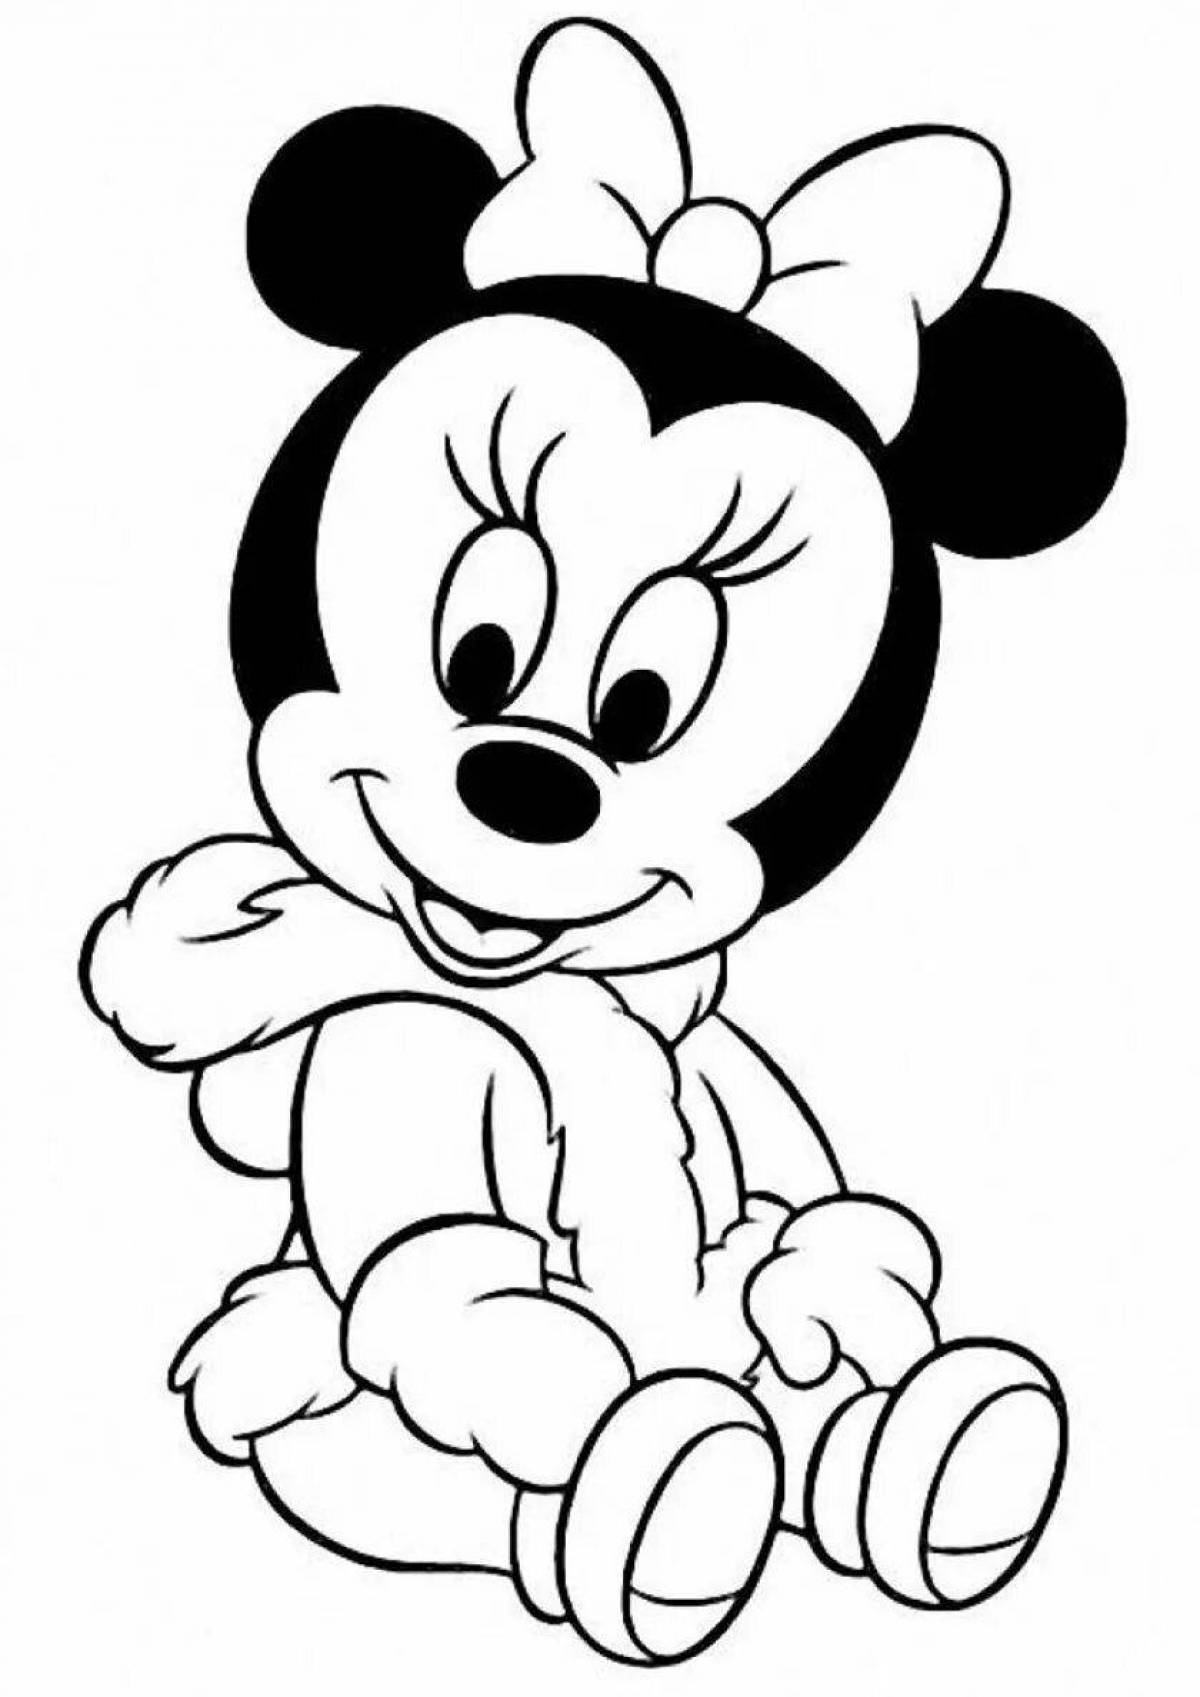 Outstanding mickey mouse coloring book for kids